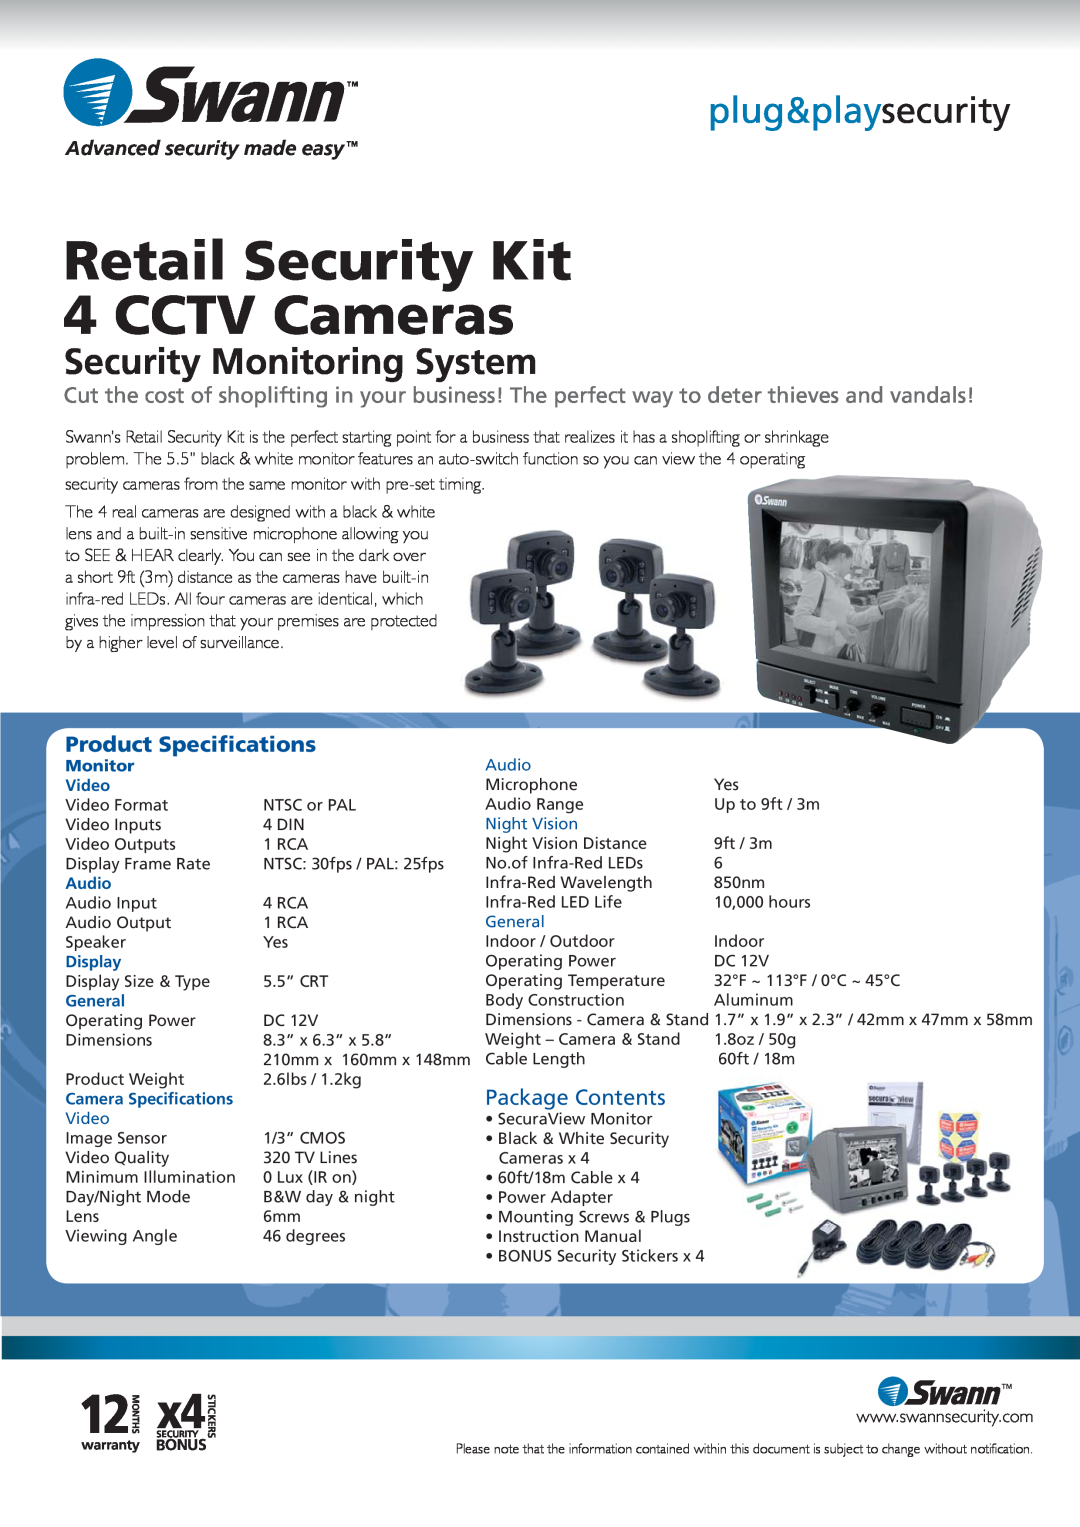 Swann SW244-SK4 Retail Security Kit 4 CCTV Cameras, plug&playsecurity, Security Monitoring System, Product Speciﬁcations 